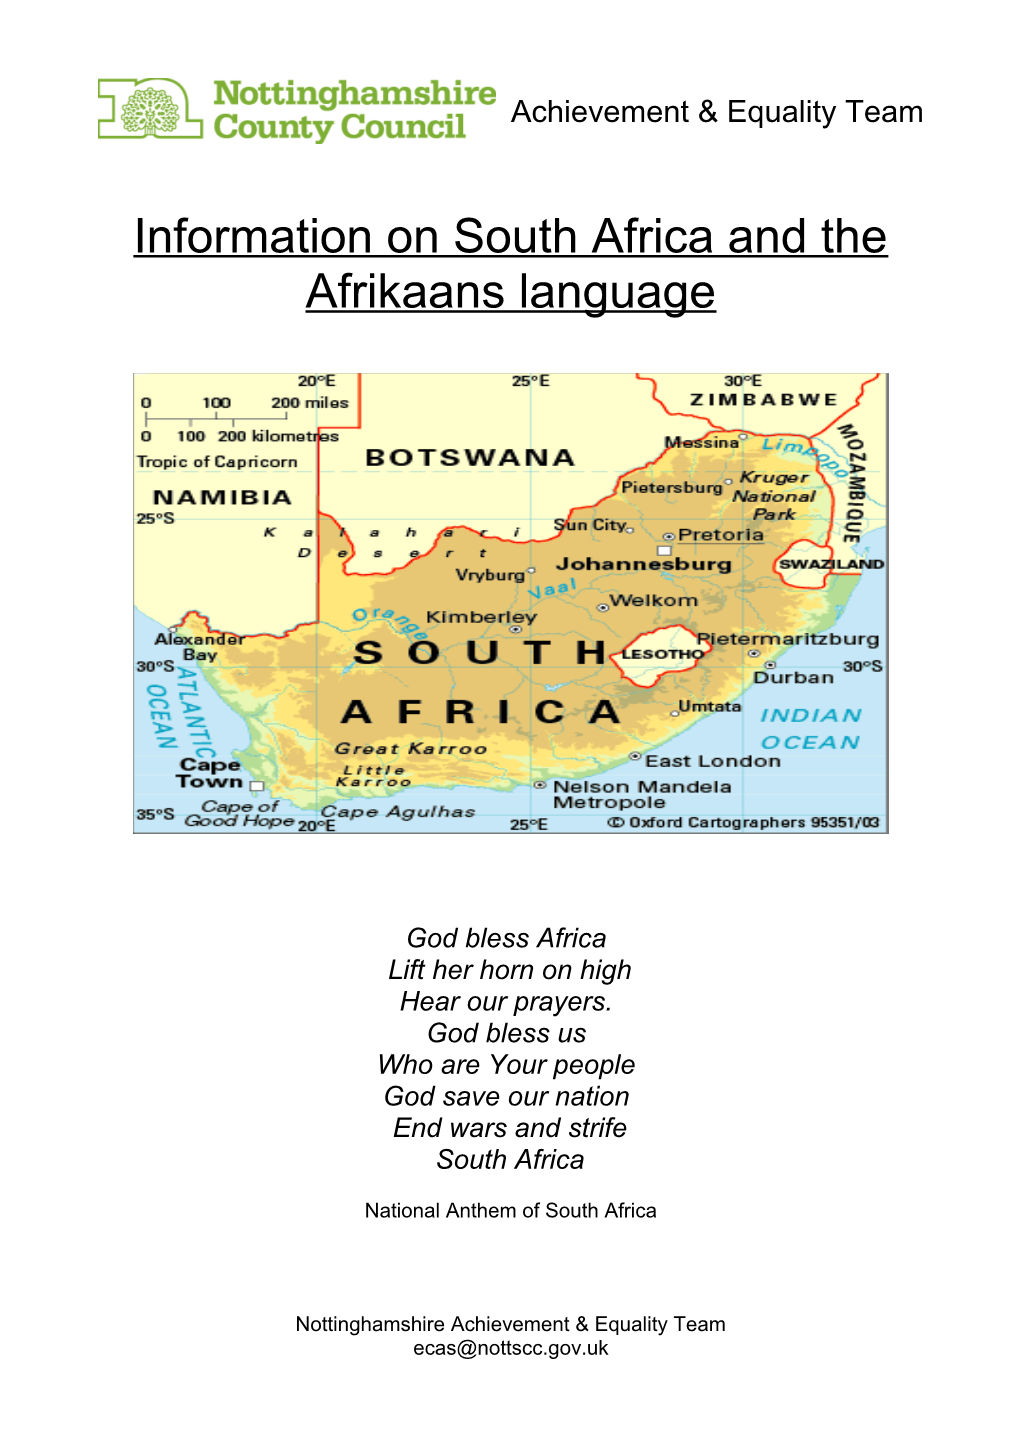 Information on South Africa and the Afrikaans Language